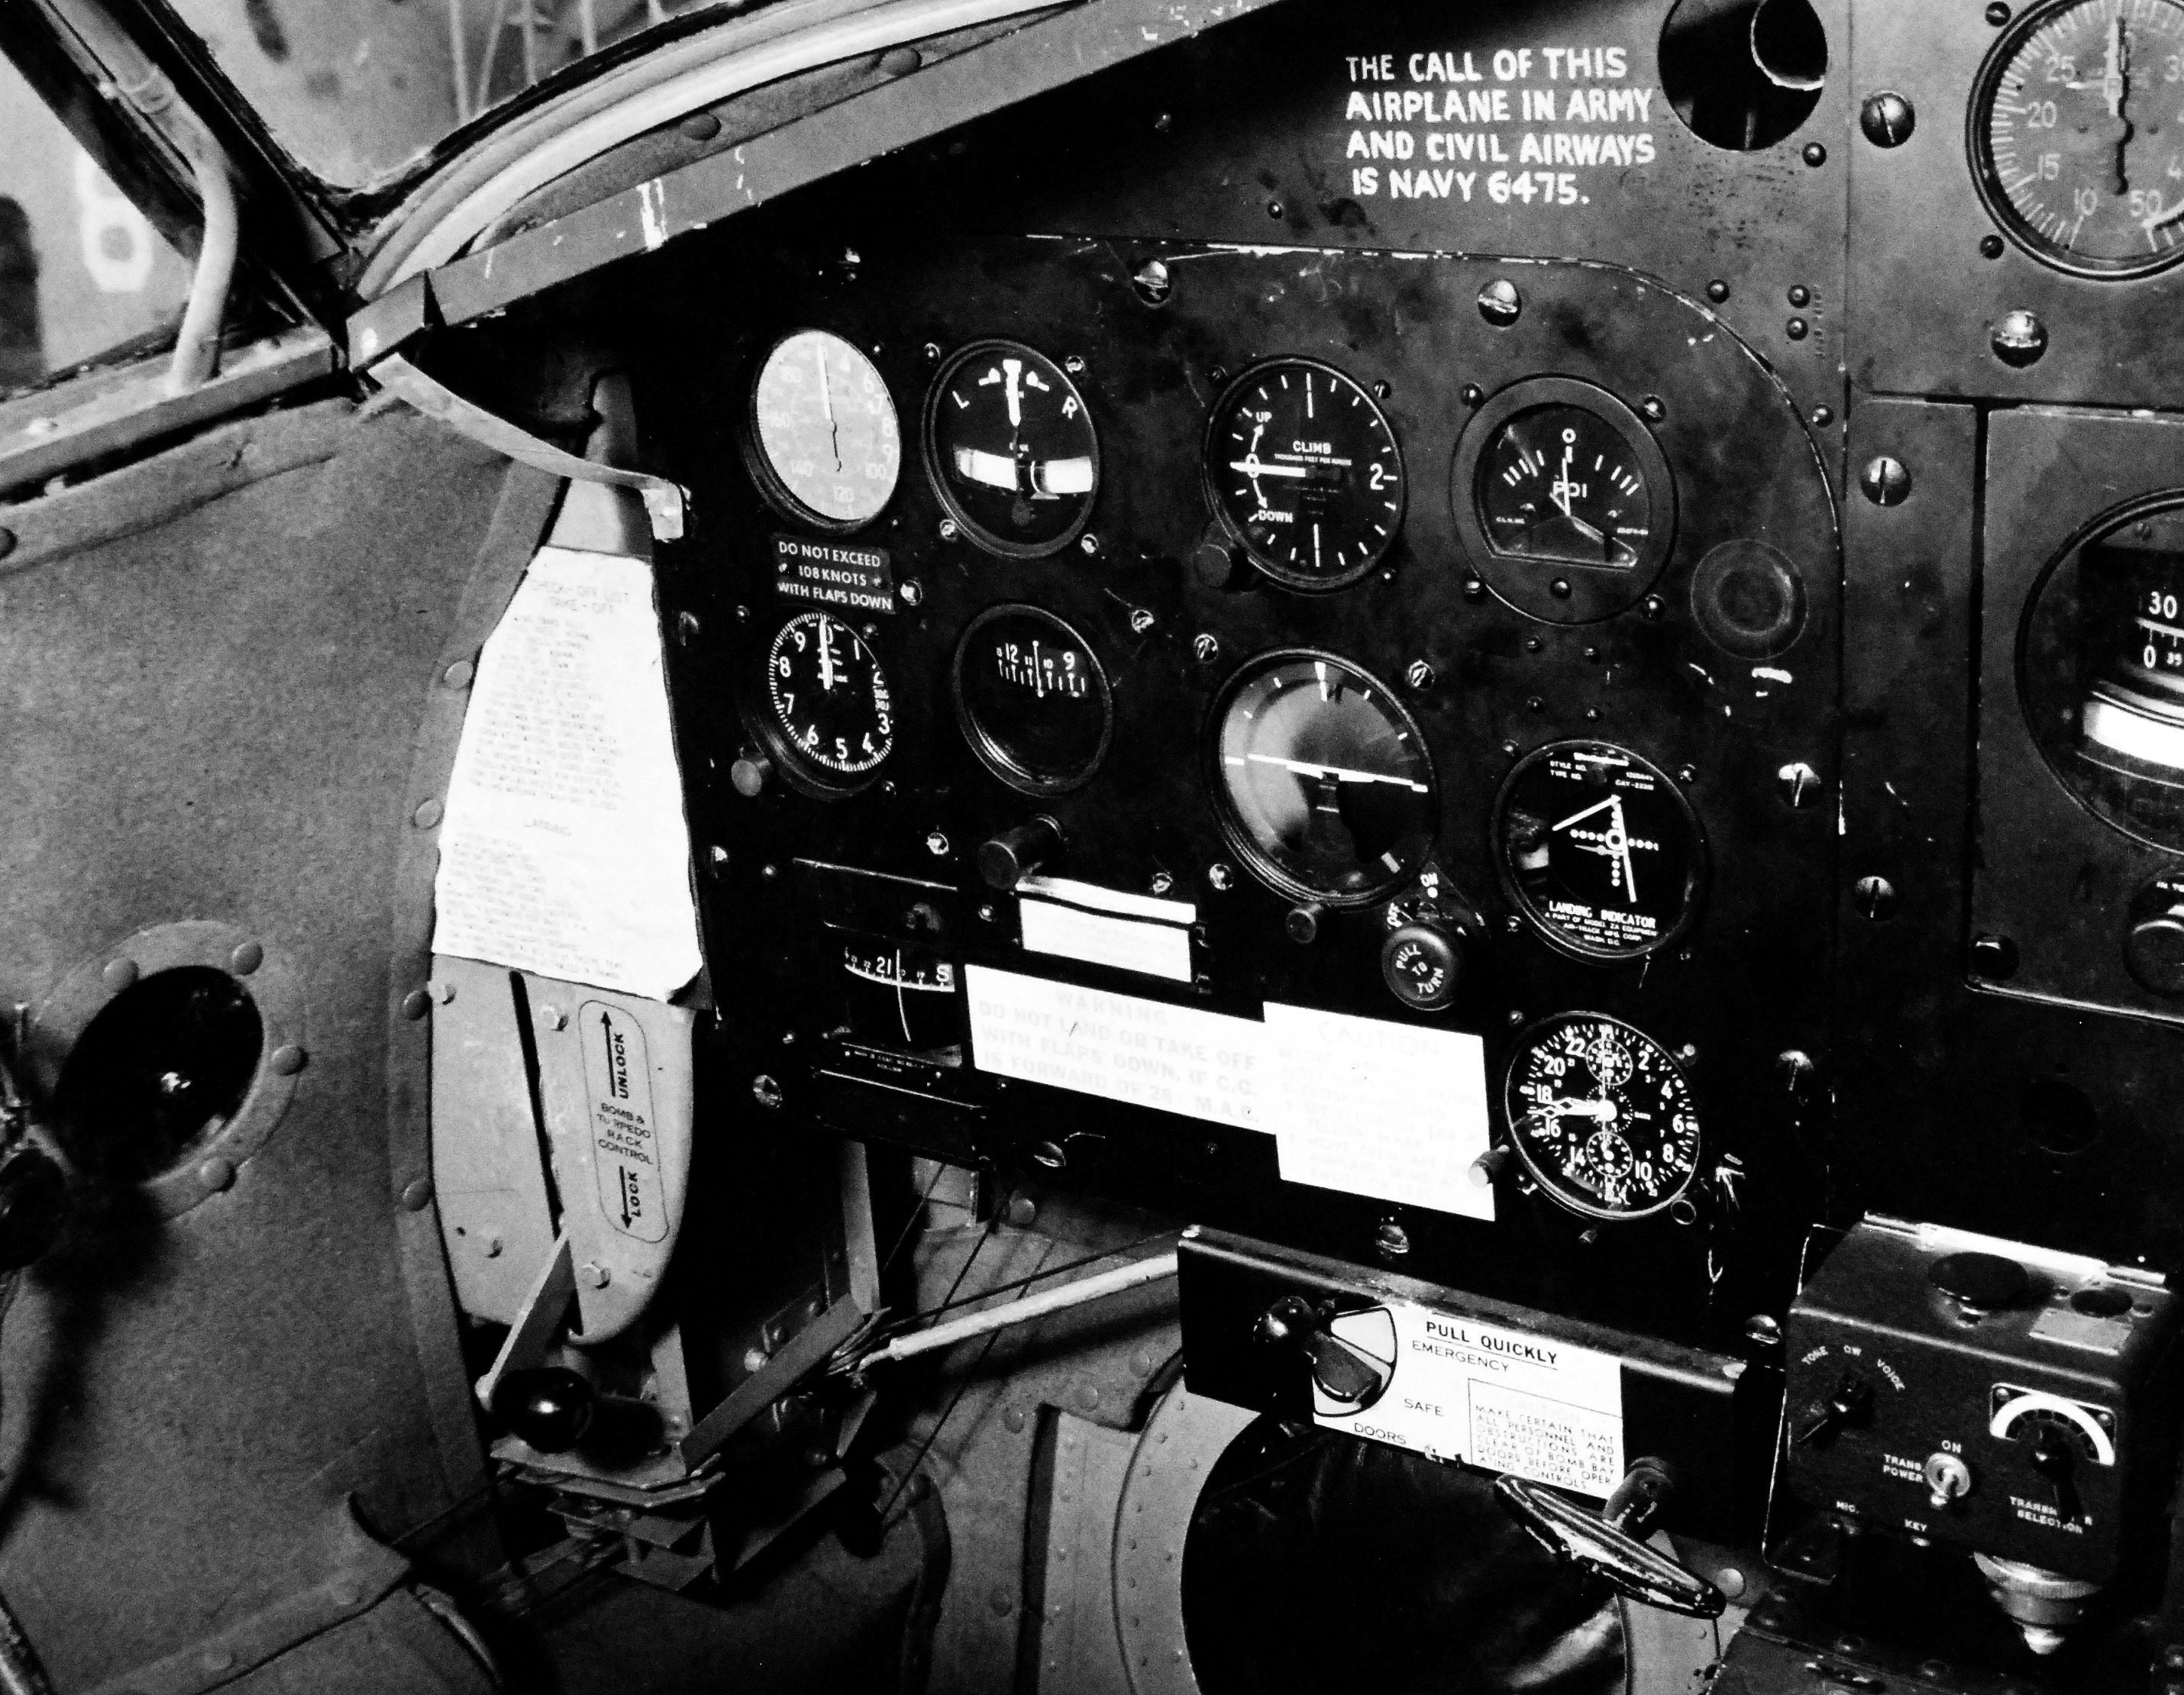 Instrument panel of a Martin PBM-3R Mariner stationed at the Naval Air Station Banana River, Florida, United States, 24 Feb 1943. Photo 1 of 3.